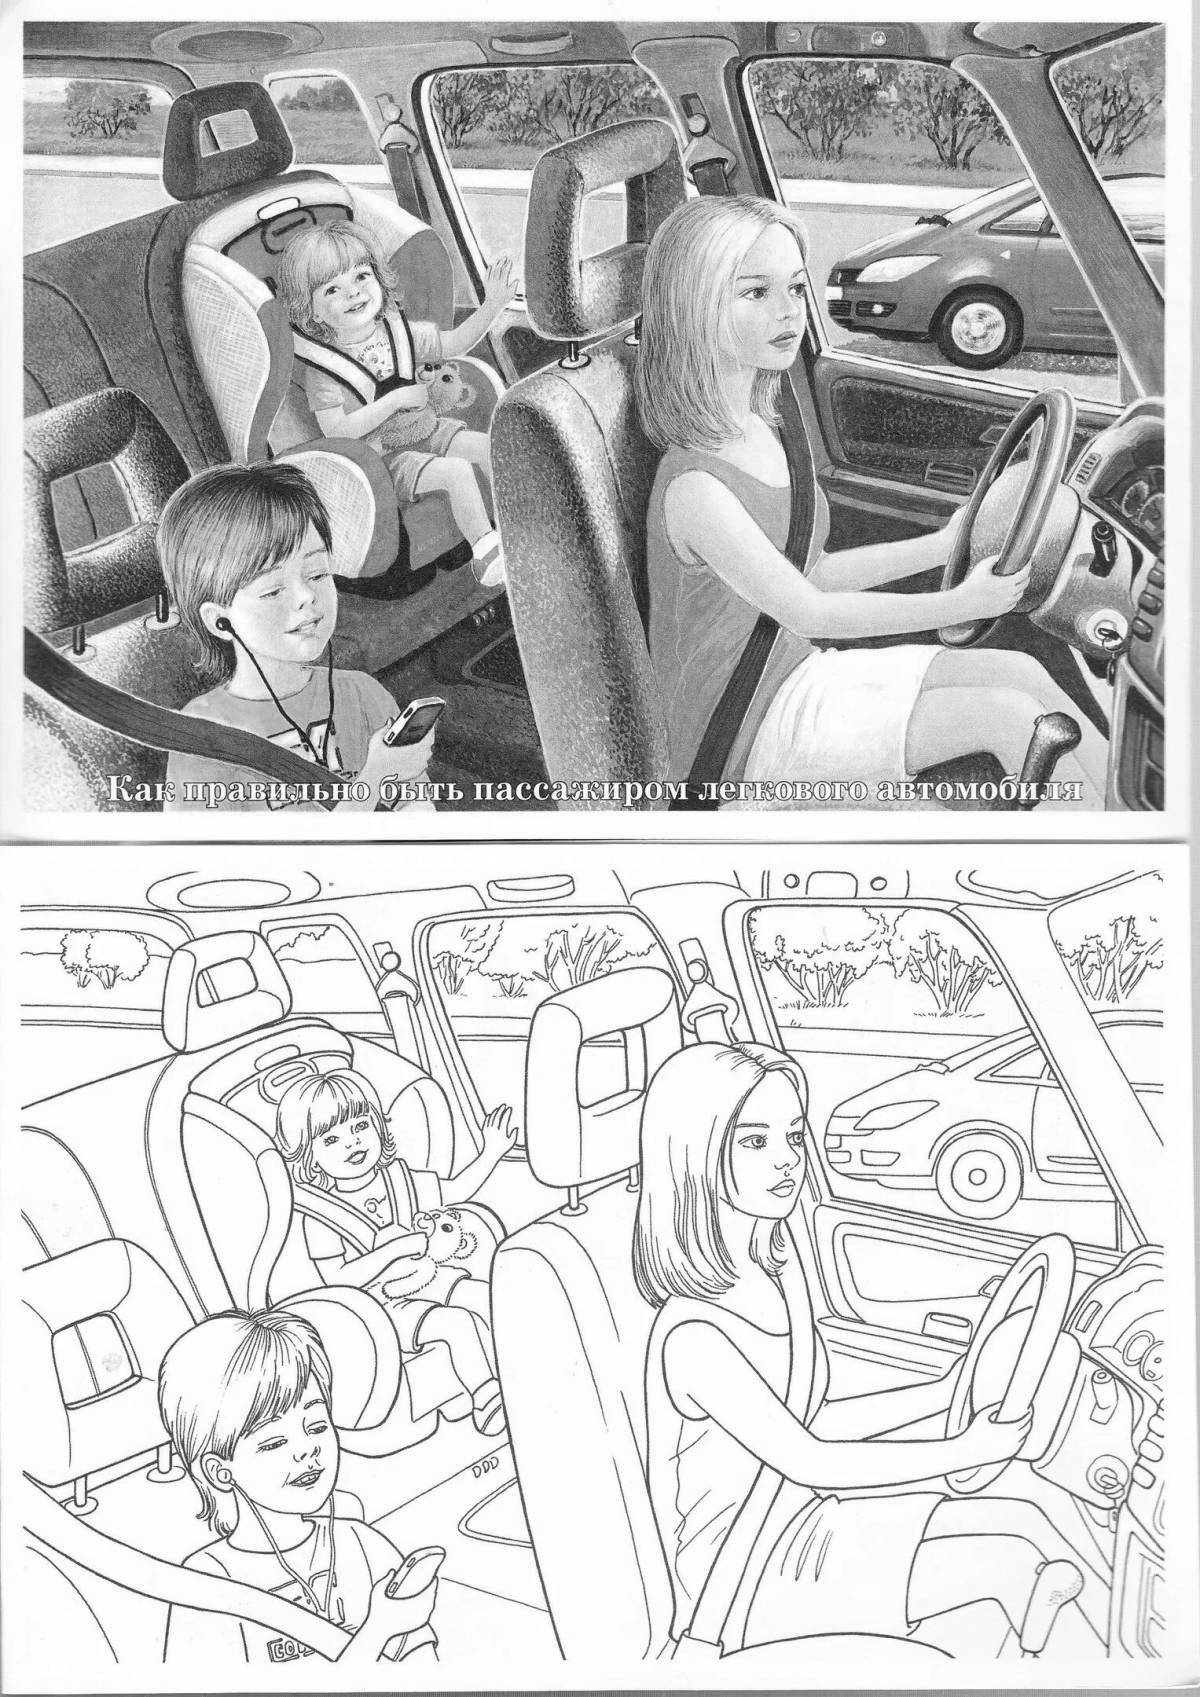 Crazy coloring pages of my dad and me for safer roads